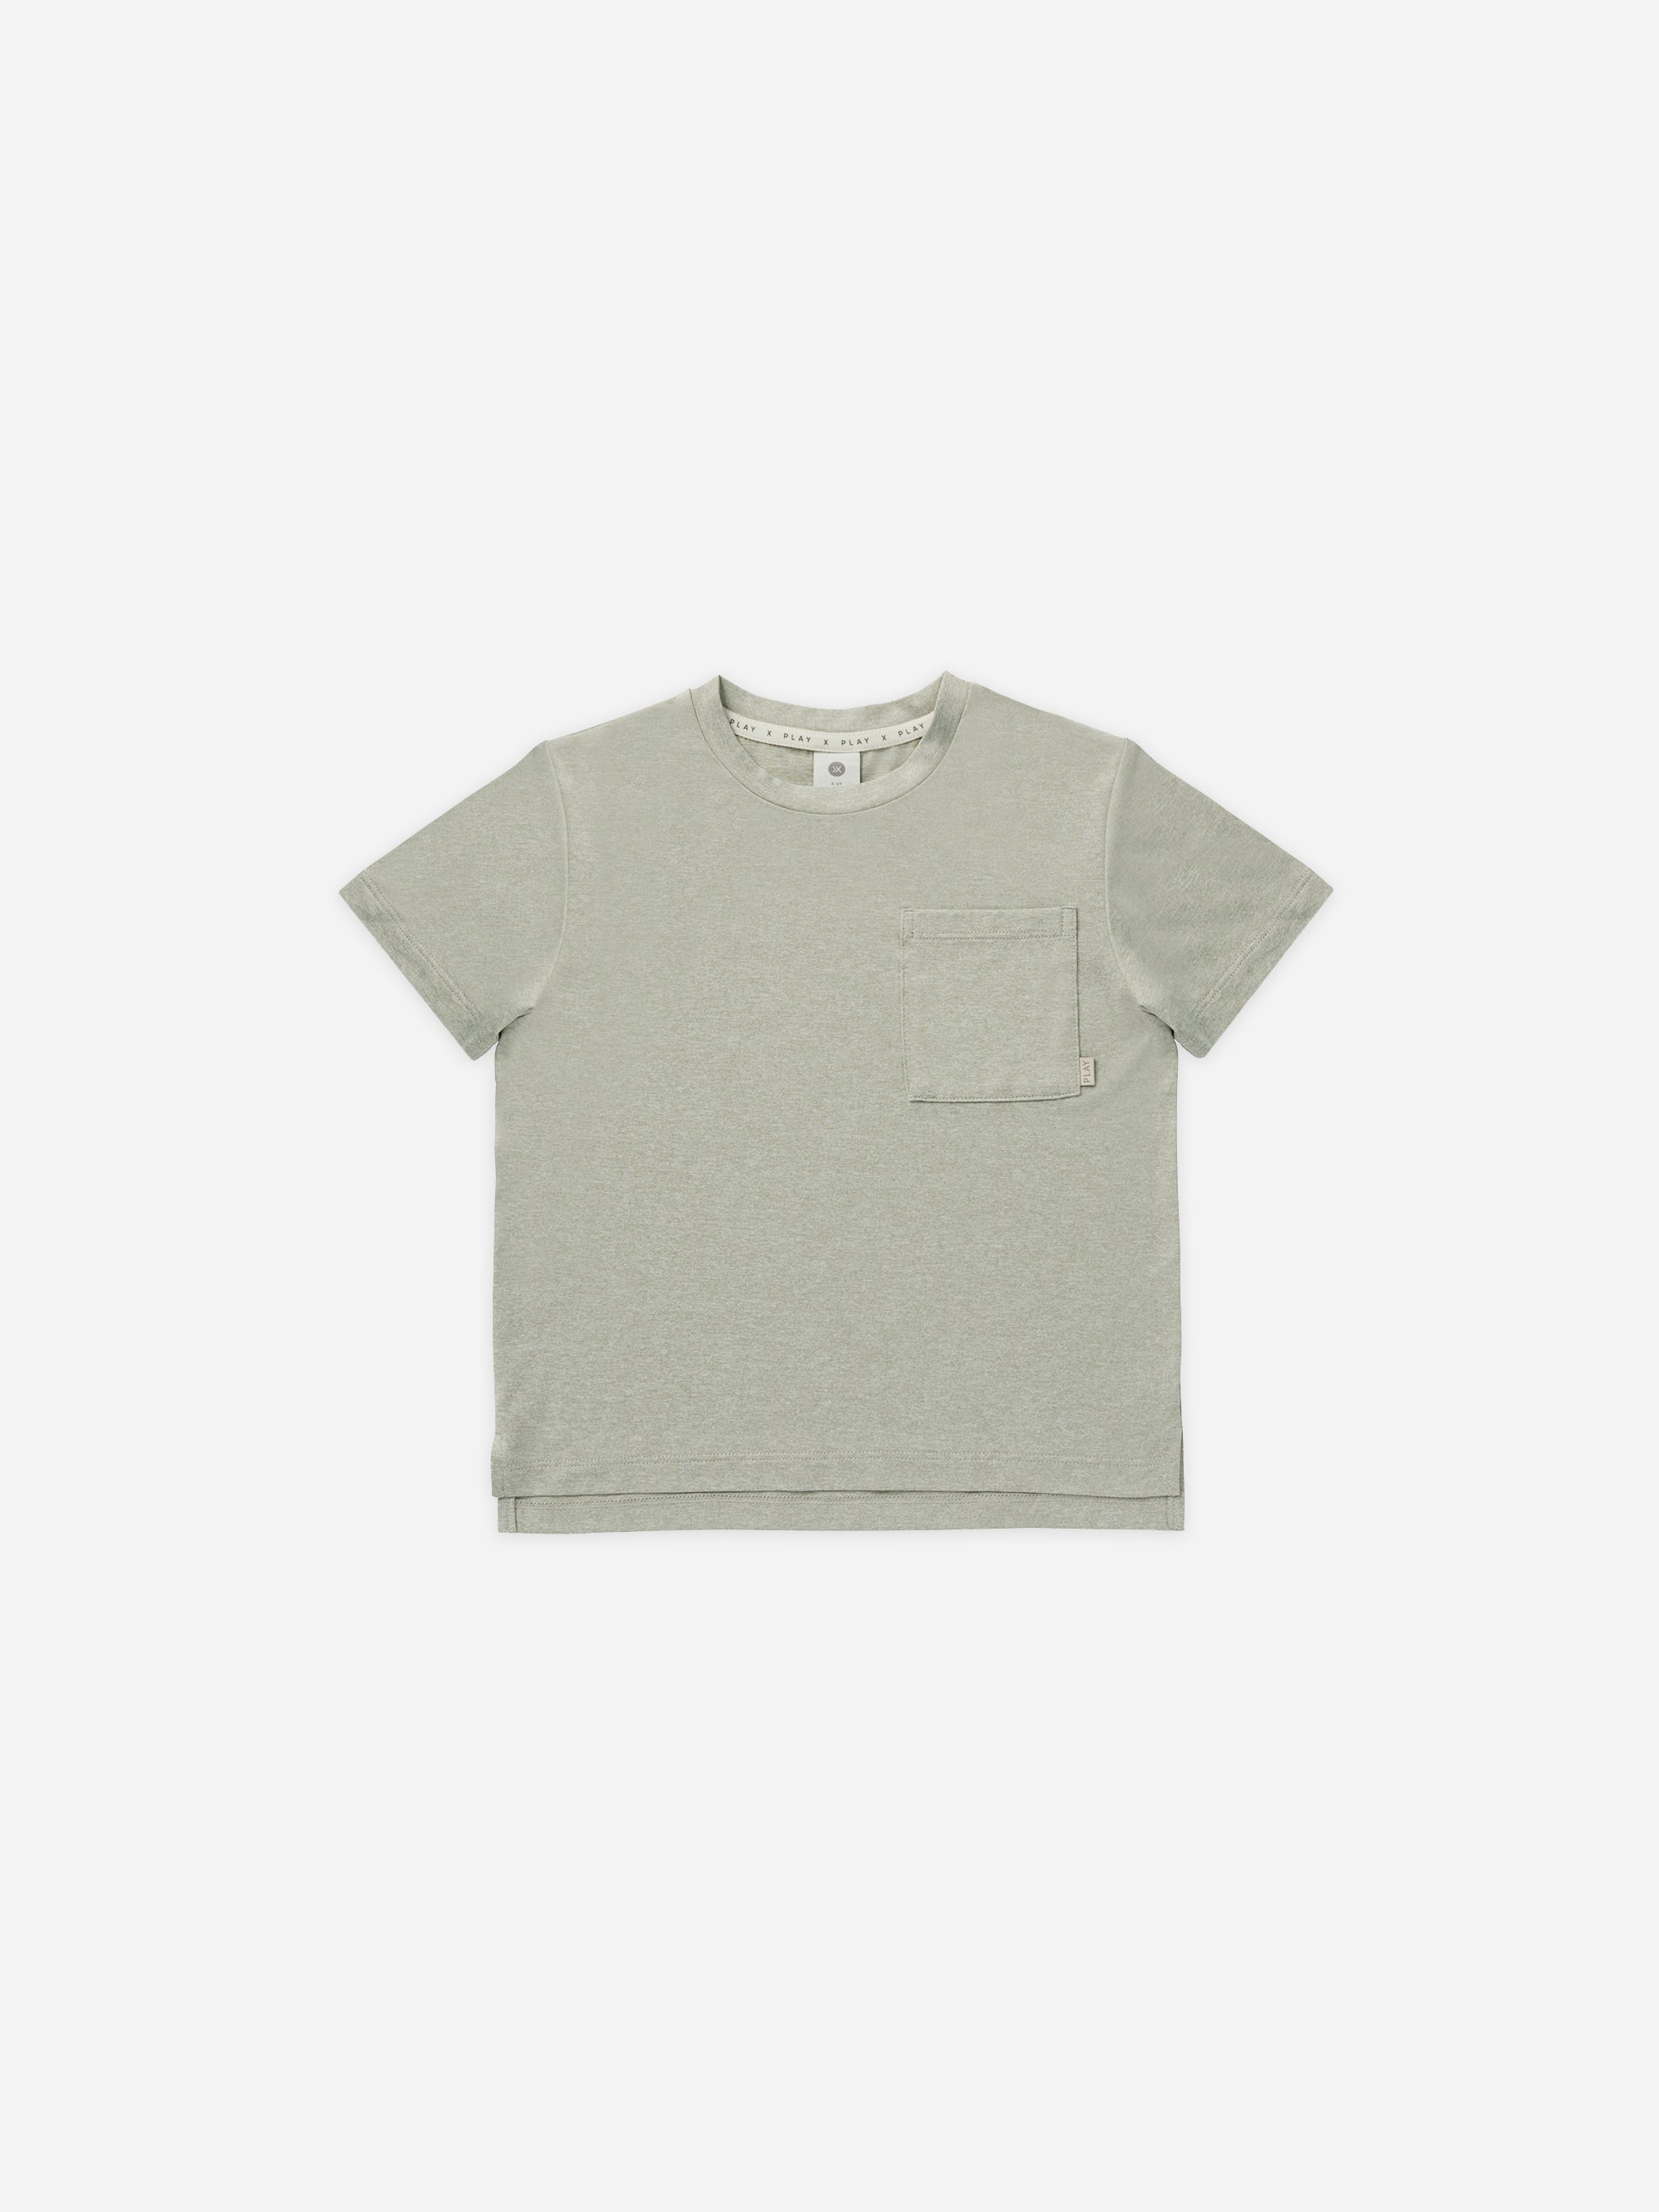 Cove Essential Pocket Tee || Heathered Sage - Rylee + Cru | Kids Clothes | Trendy Baby Clothes | Modern Infant Outfits |